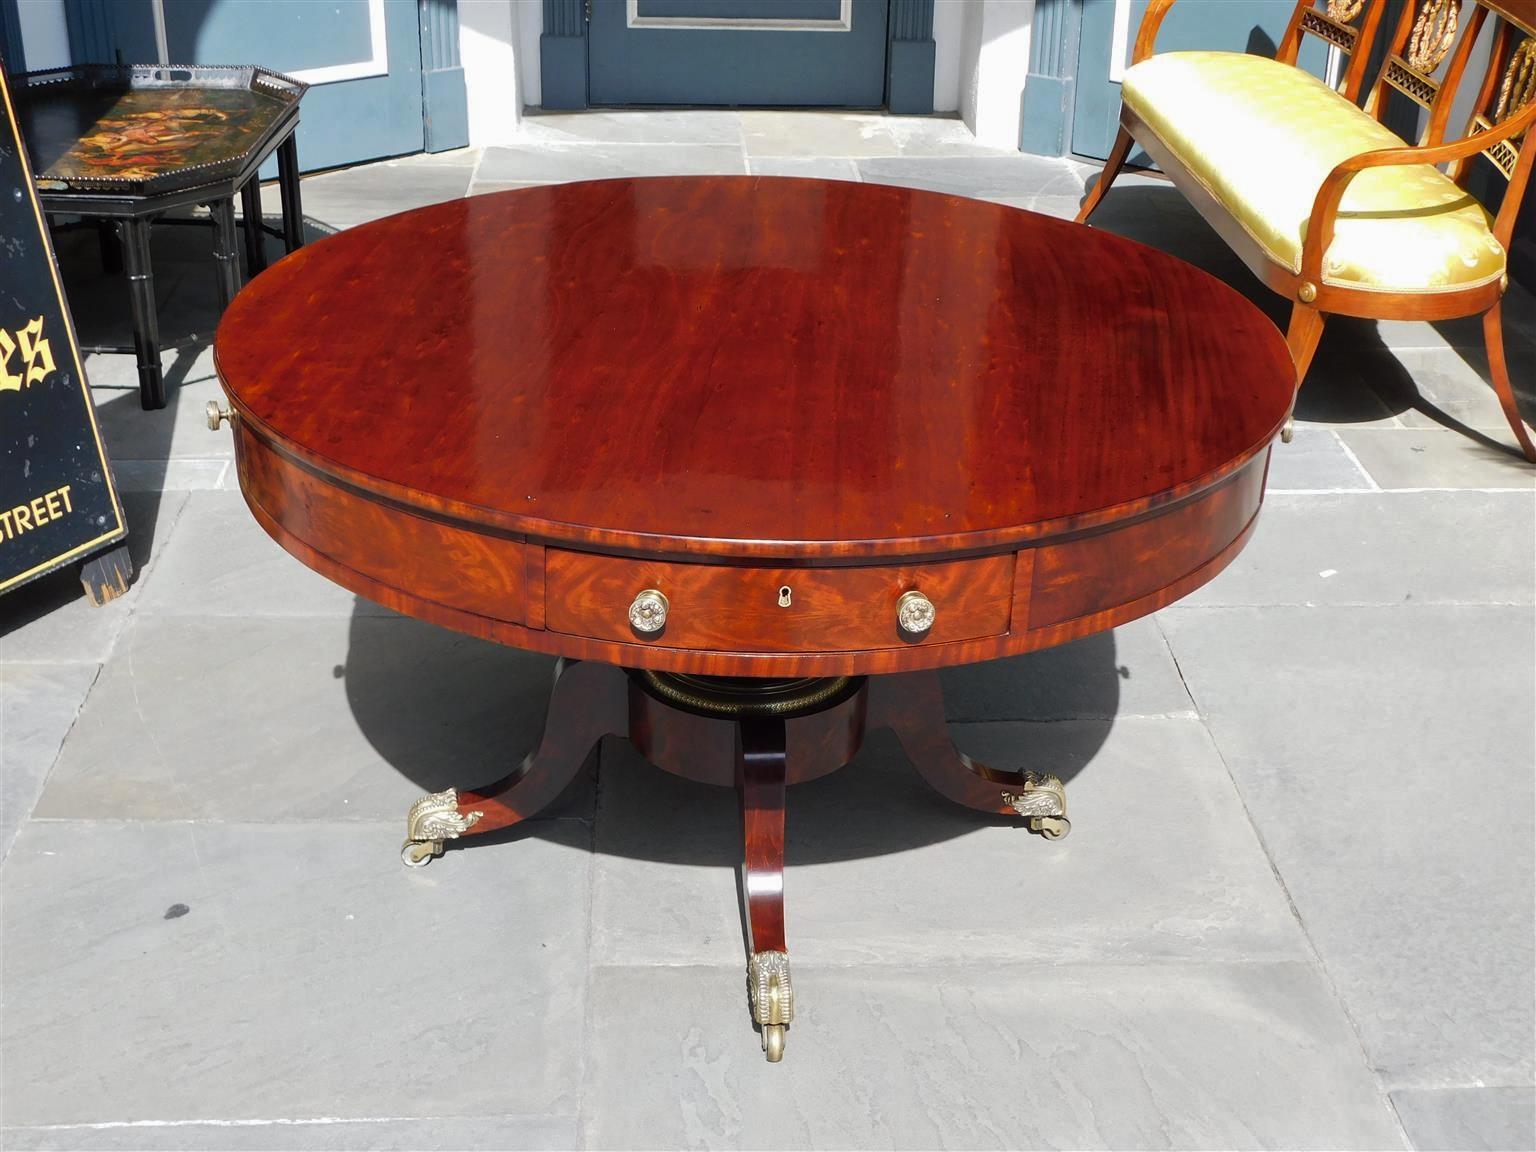 American Regency mahogany four drawer circular center table with a fitted interior writing desk, foliage brass pulls, key hole escutcheons, central support column with decorative brass ring, and resting on saber legs with the original floral brass